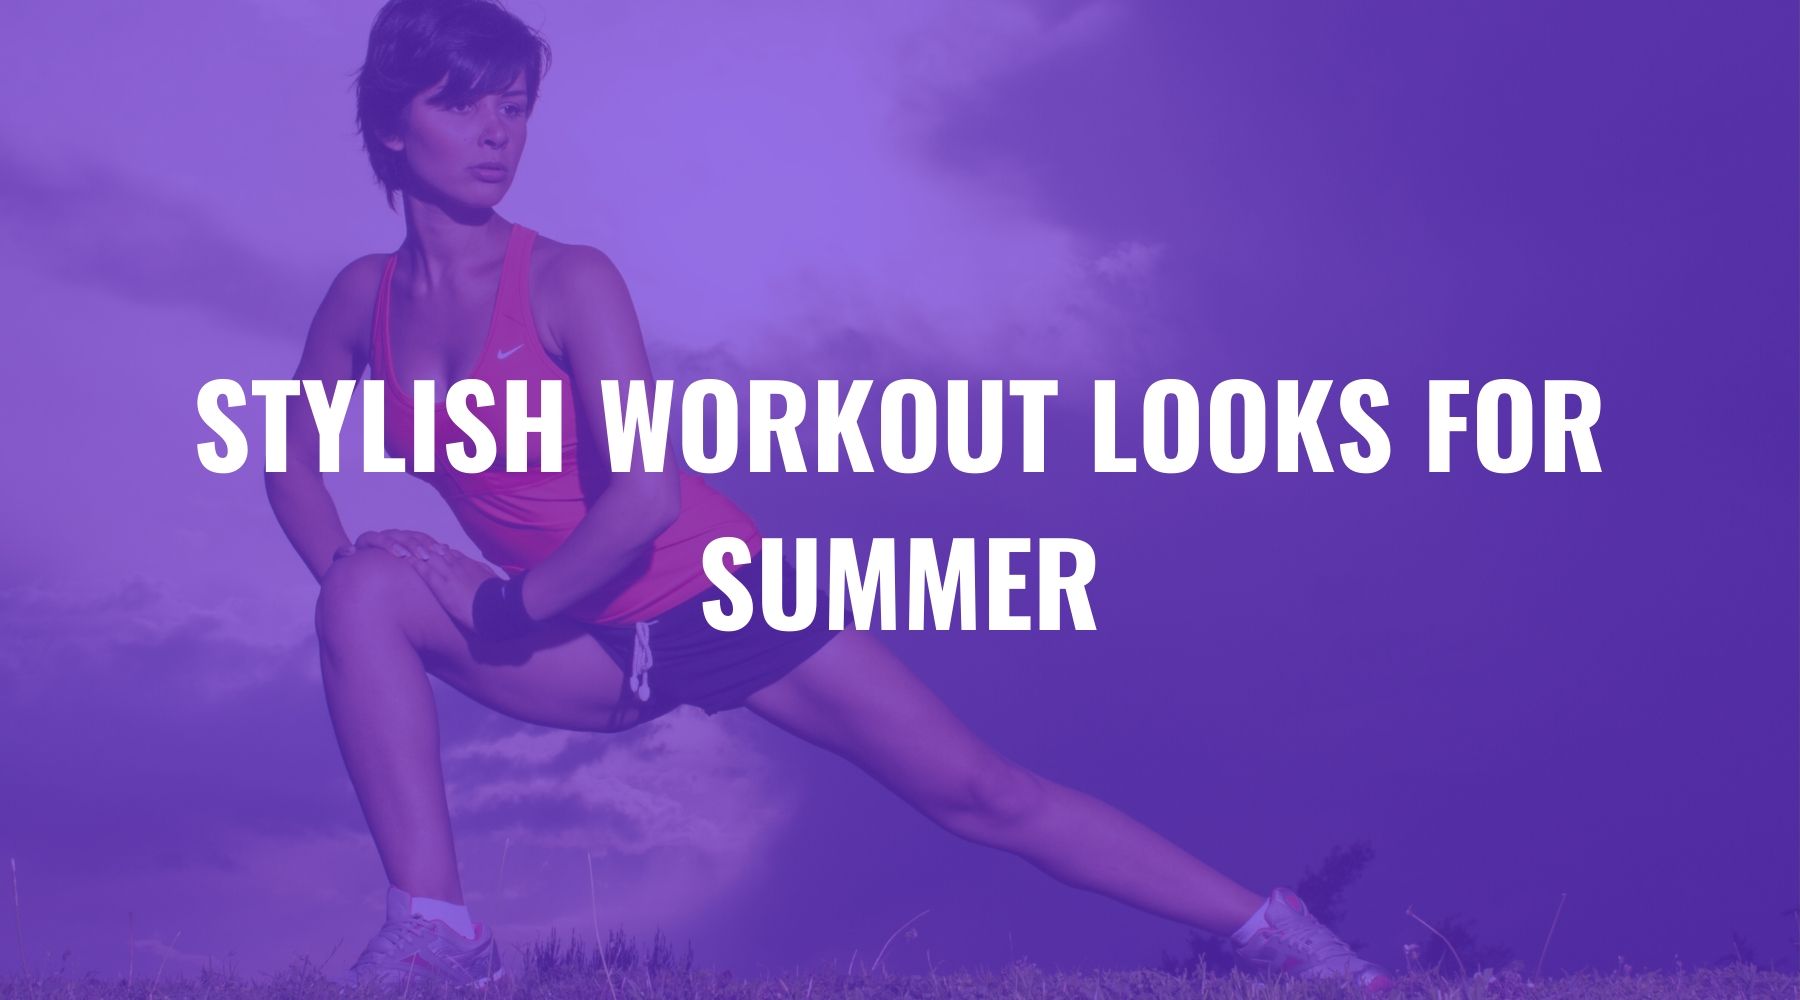 Stylish Workout Looks for Summer